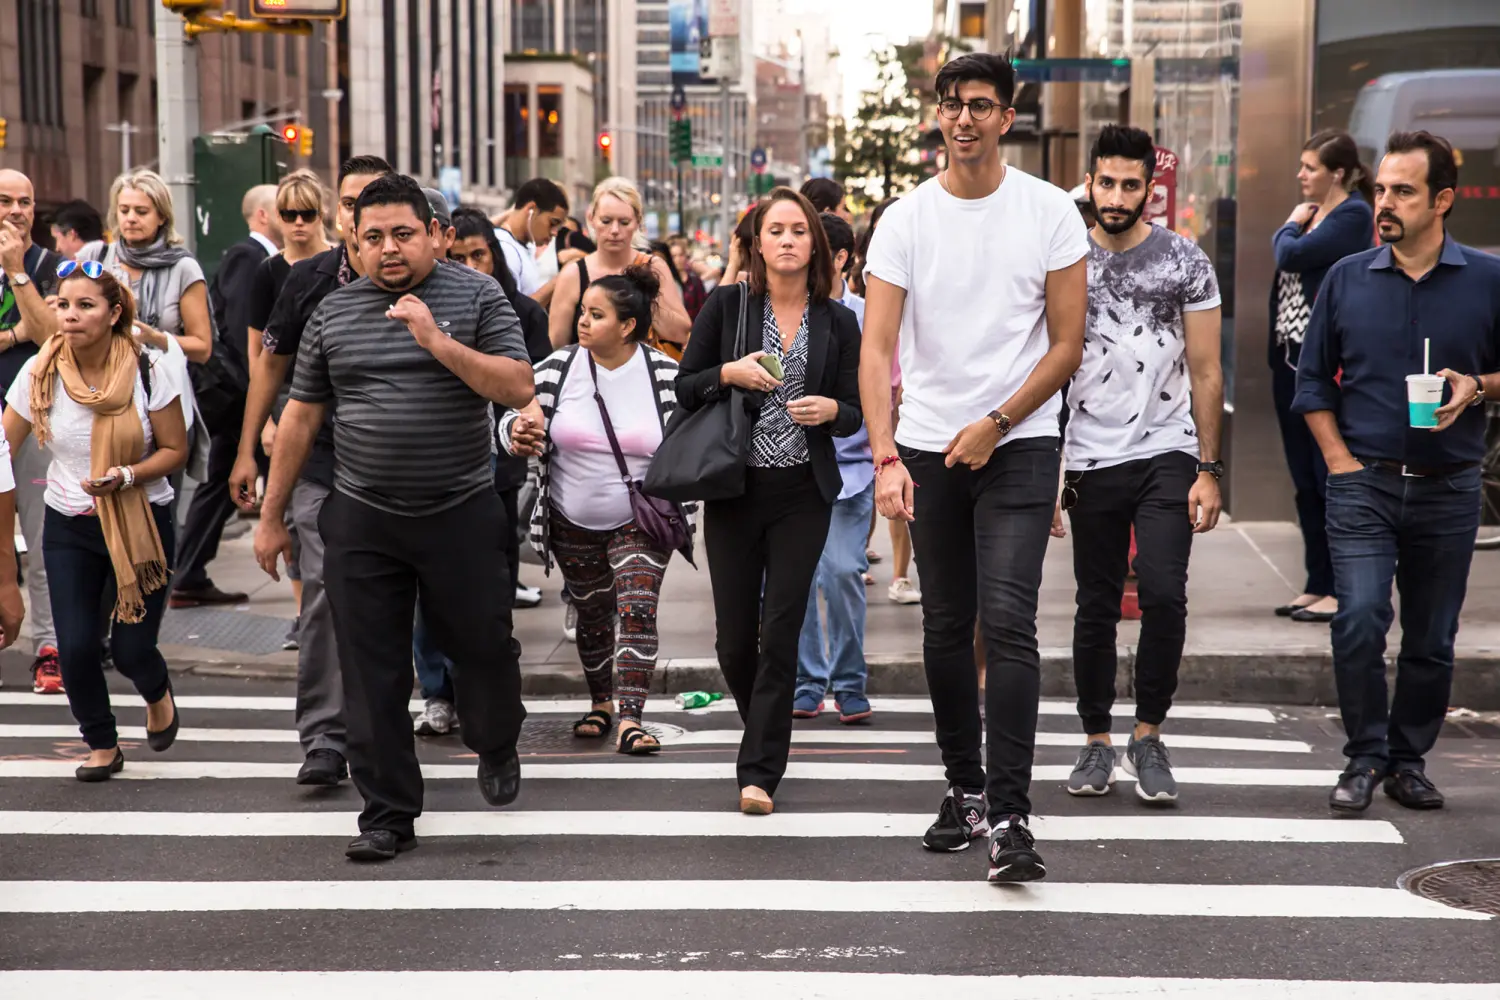 NEW YORK CITY: Pictured here is a crosswalk in midtown Manhattan with with a diversity of pedestrians crossing.